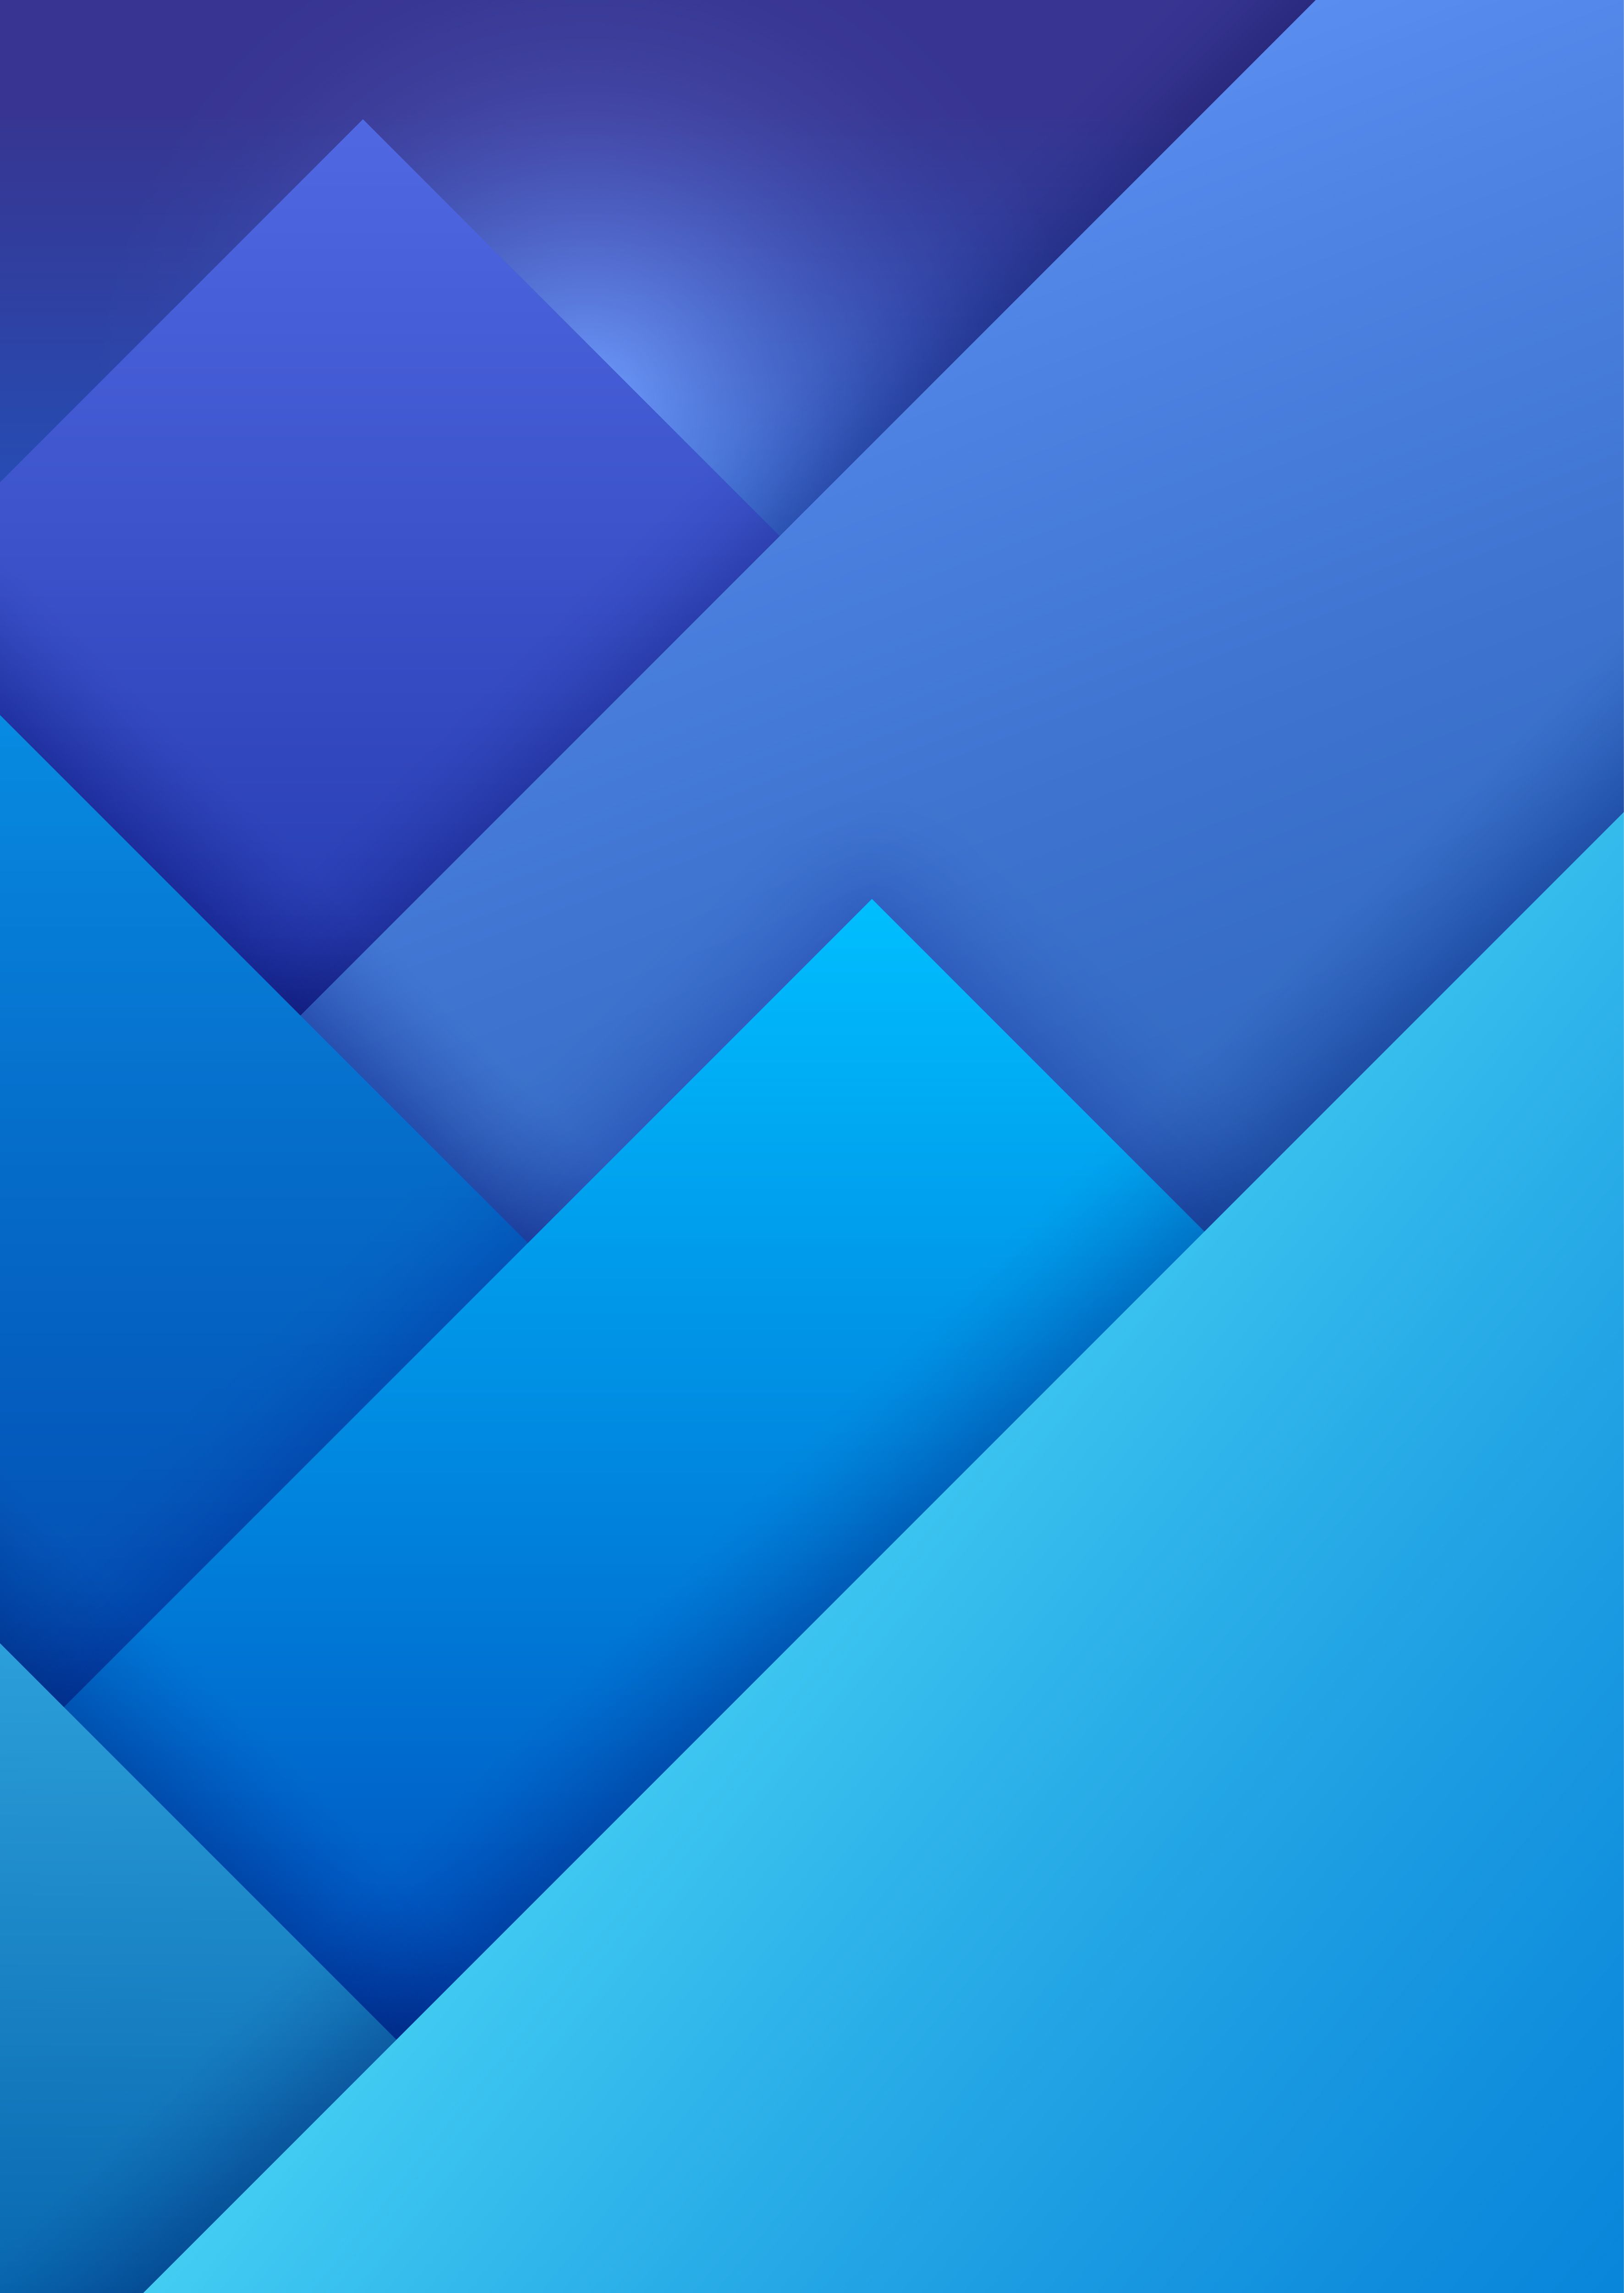 Material Design Background with Mountain Landscape.. Material Design Background with Mountain Landscape. Vector Blue Illustration.